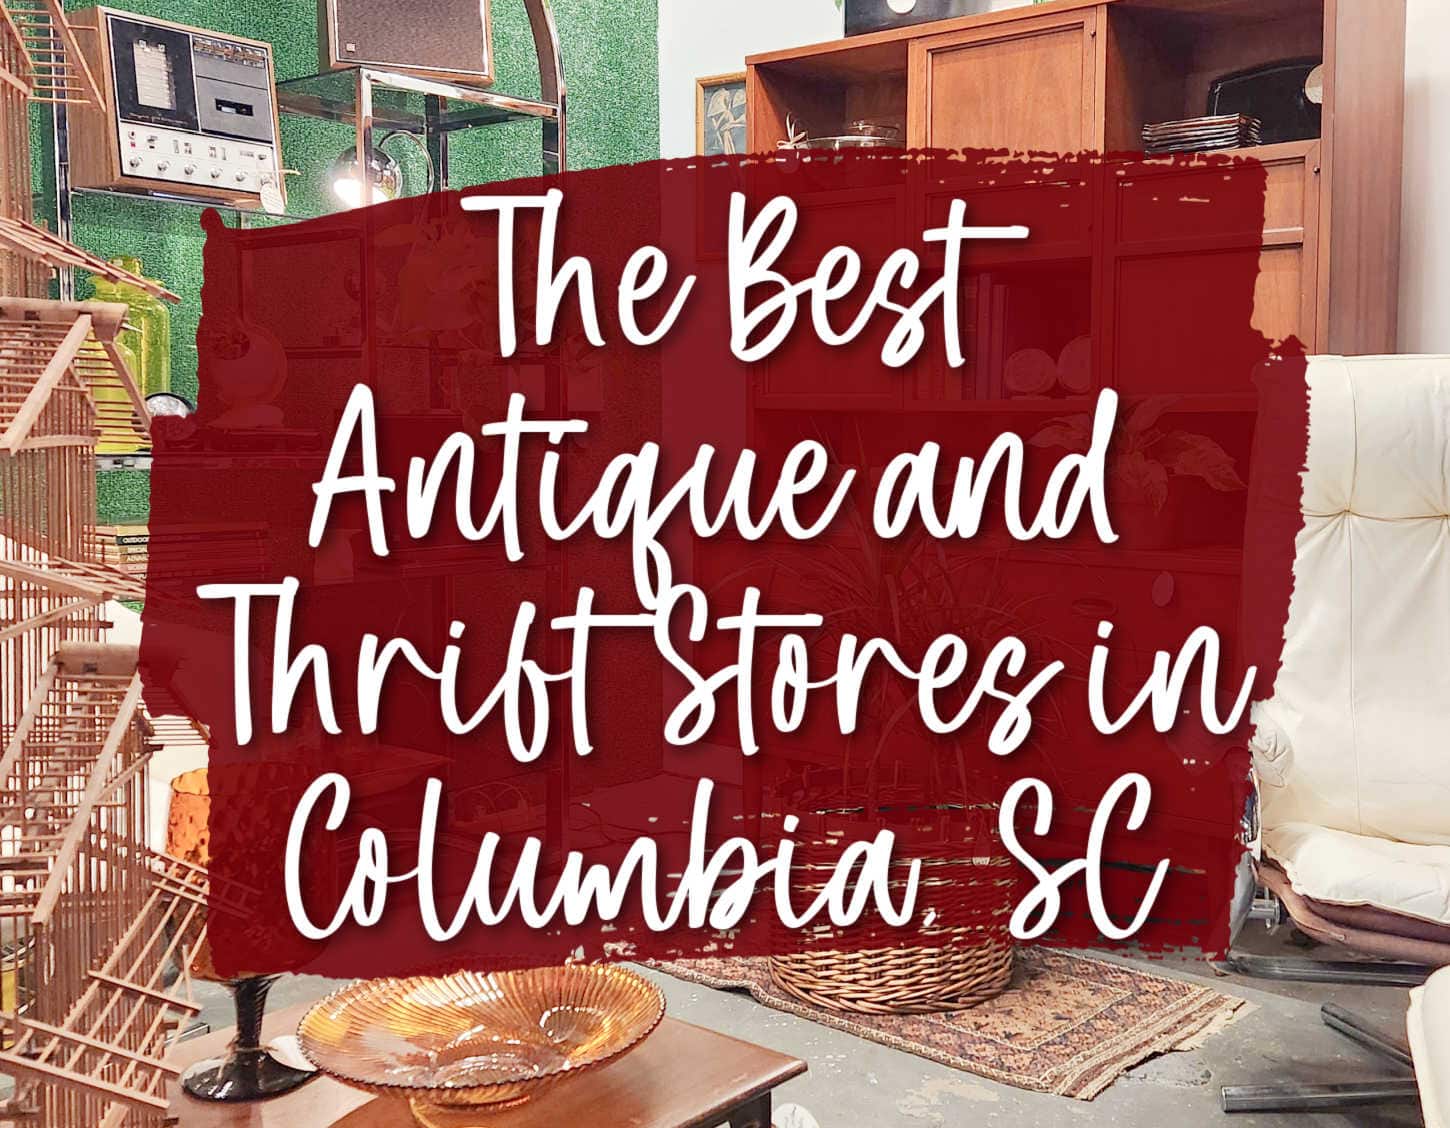 Antique and Thrift Stores in Columbia, SC